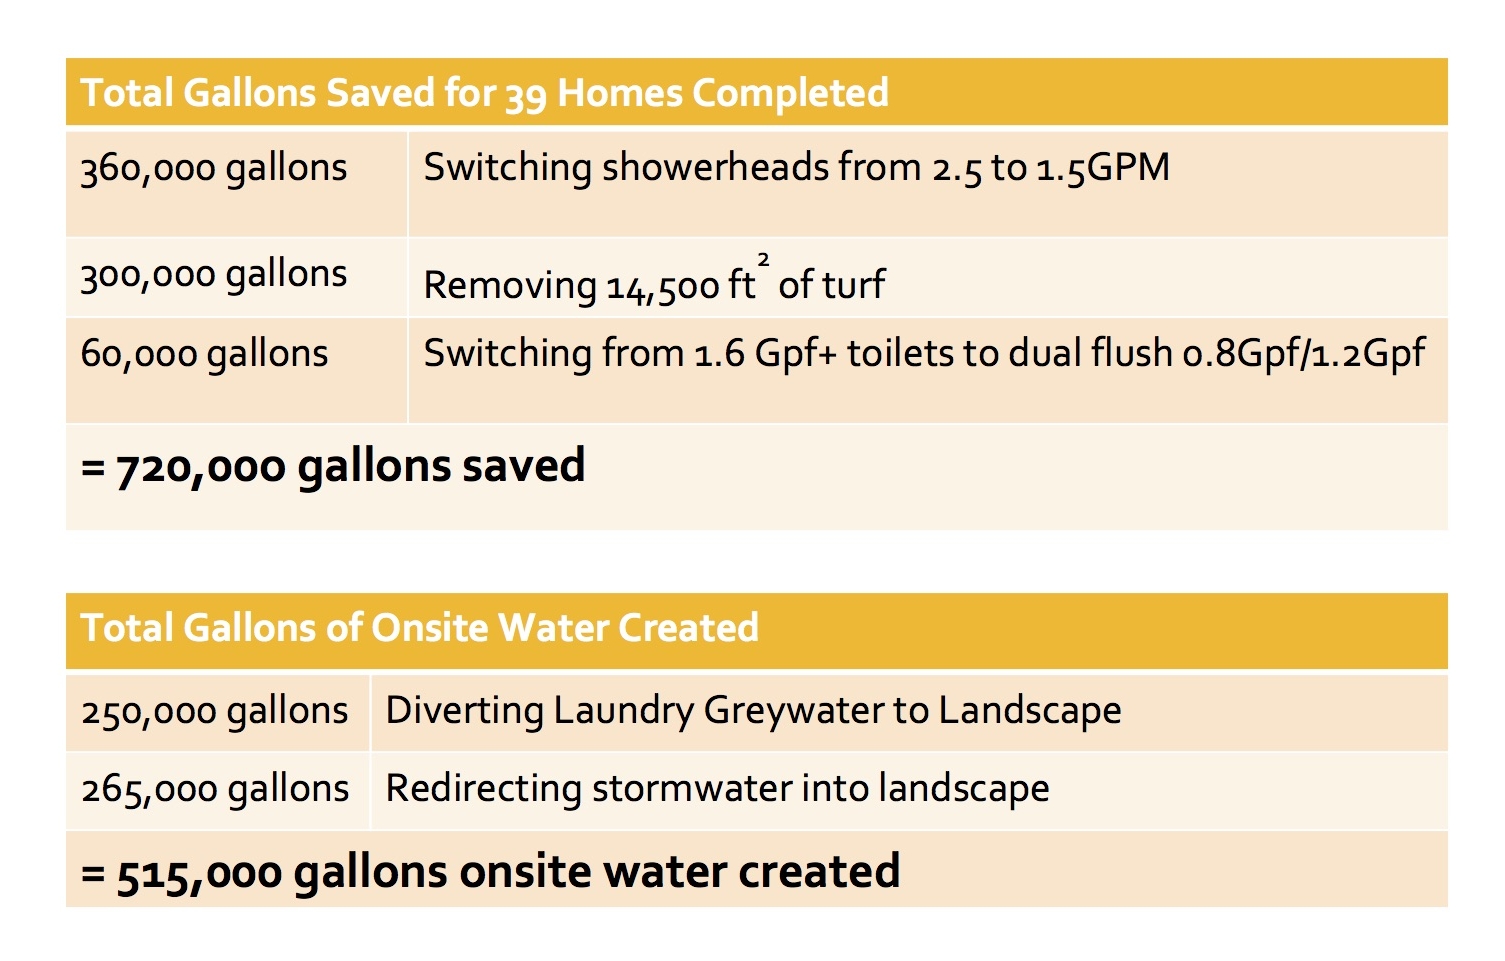 Annual water savings from implementation of water harvesting features for 39 homes.